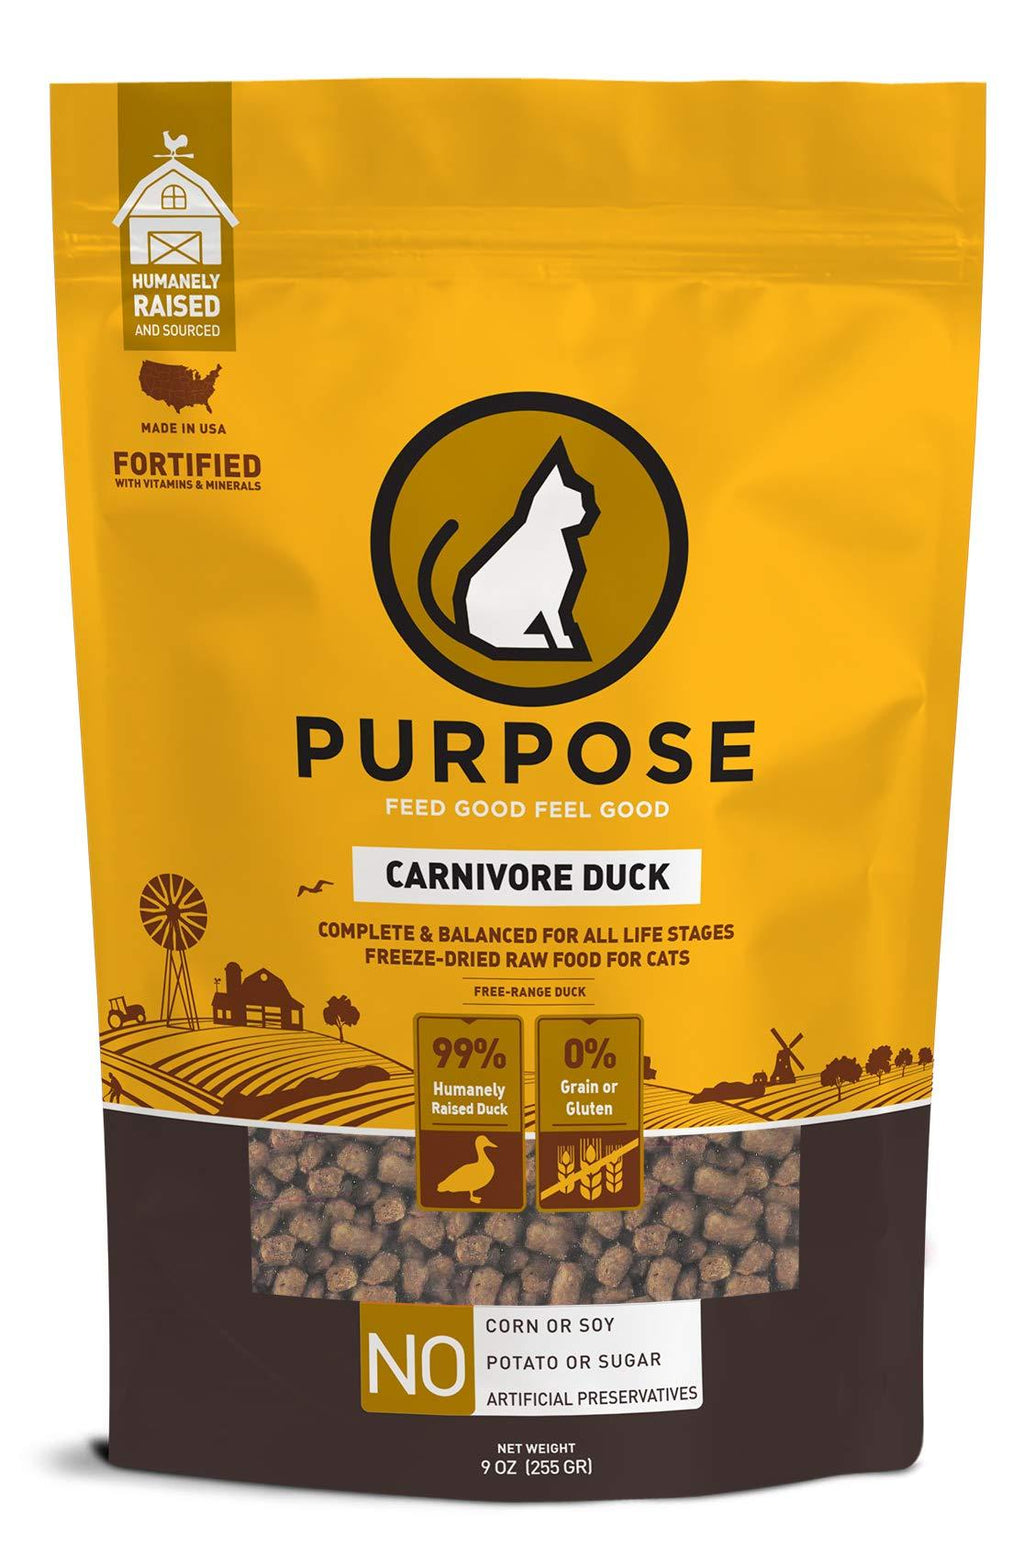 [Australia] - PURPOSE All-Natural Freeze-Dried Carnivore Duck Morsels Grain-Free Cat Food 9 oz. | Made in The USA 